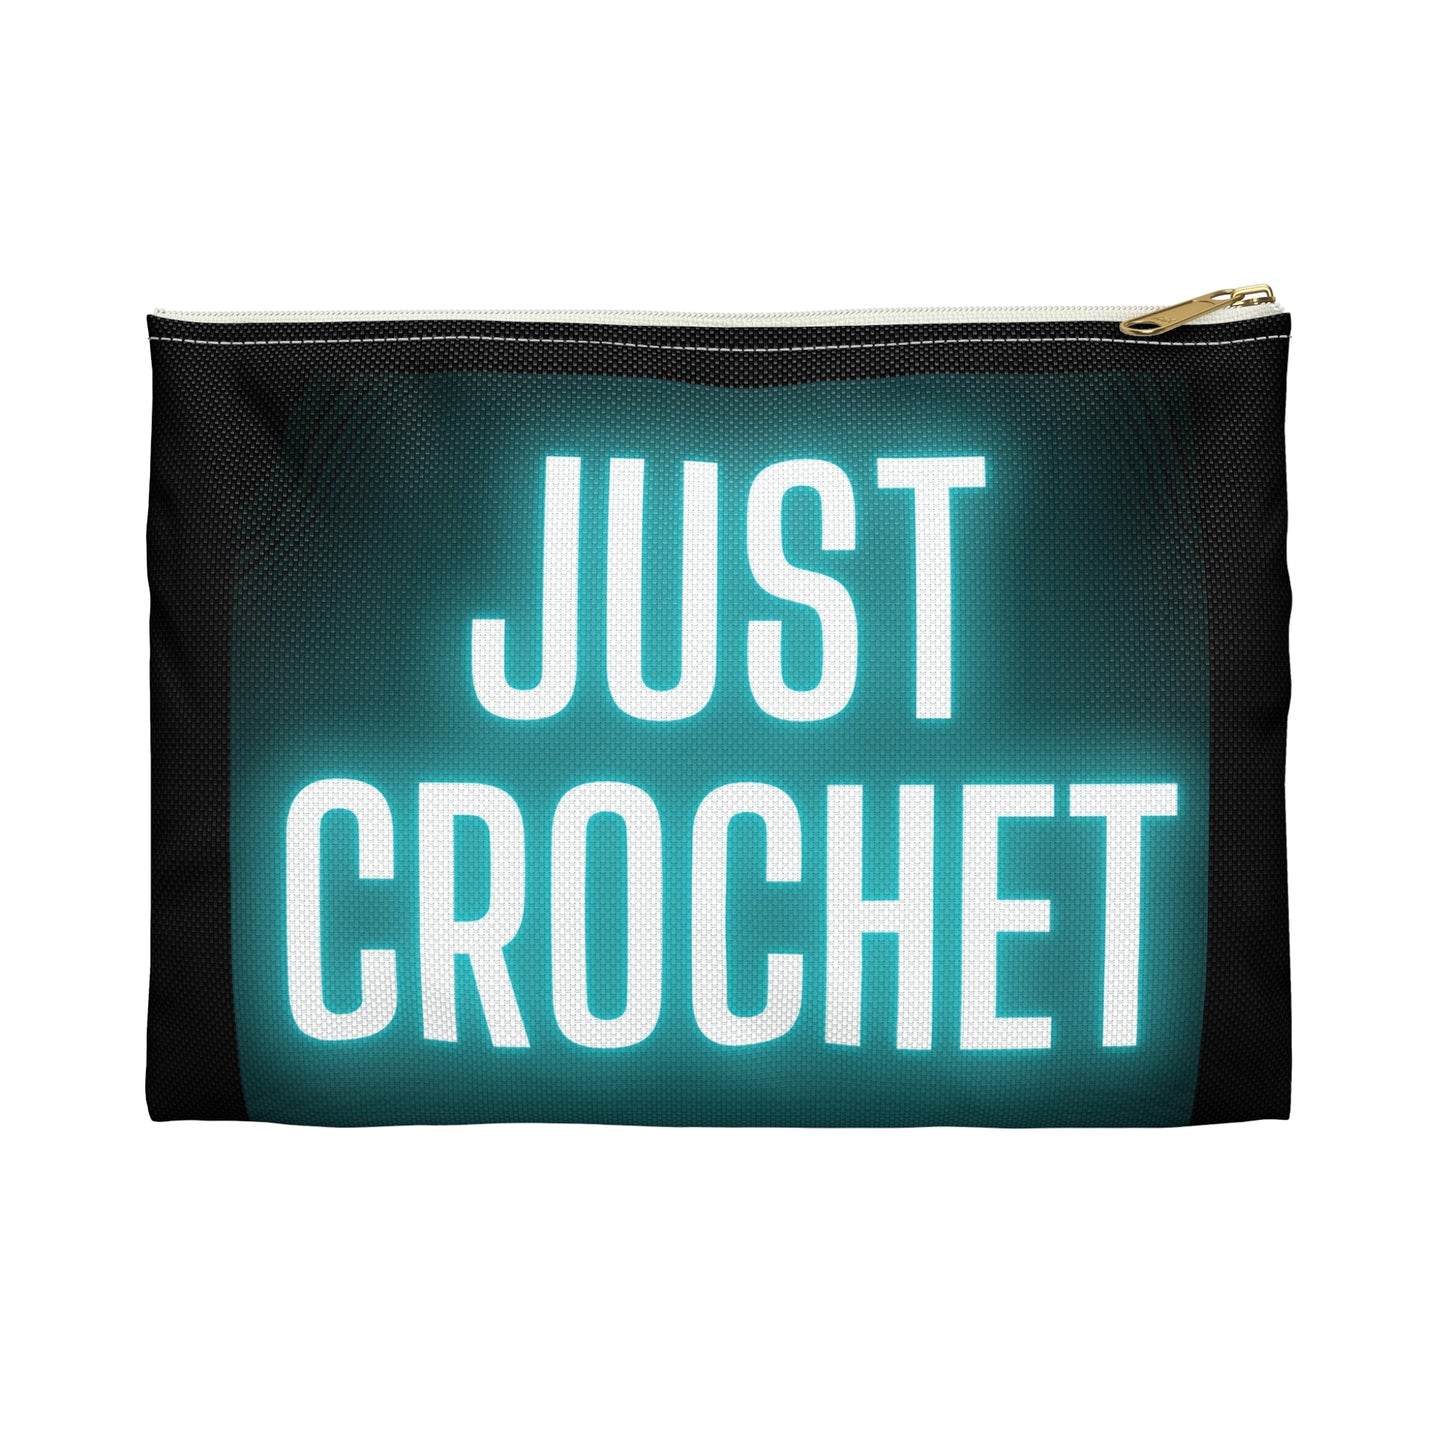 Just Crochet Blue Accessory Pouch